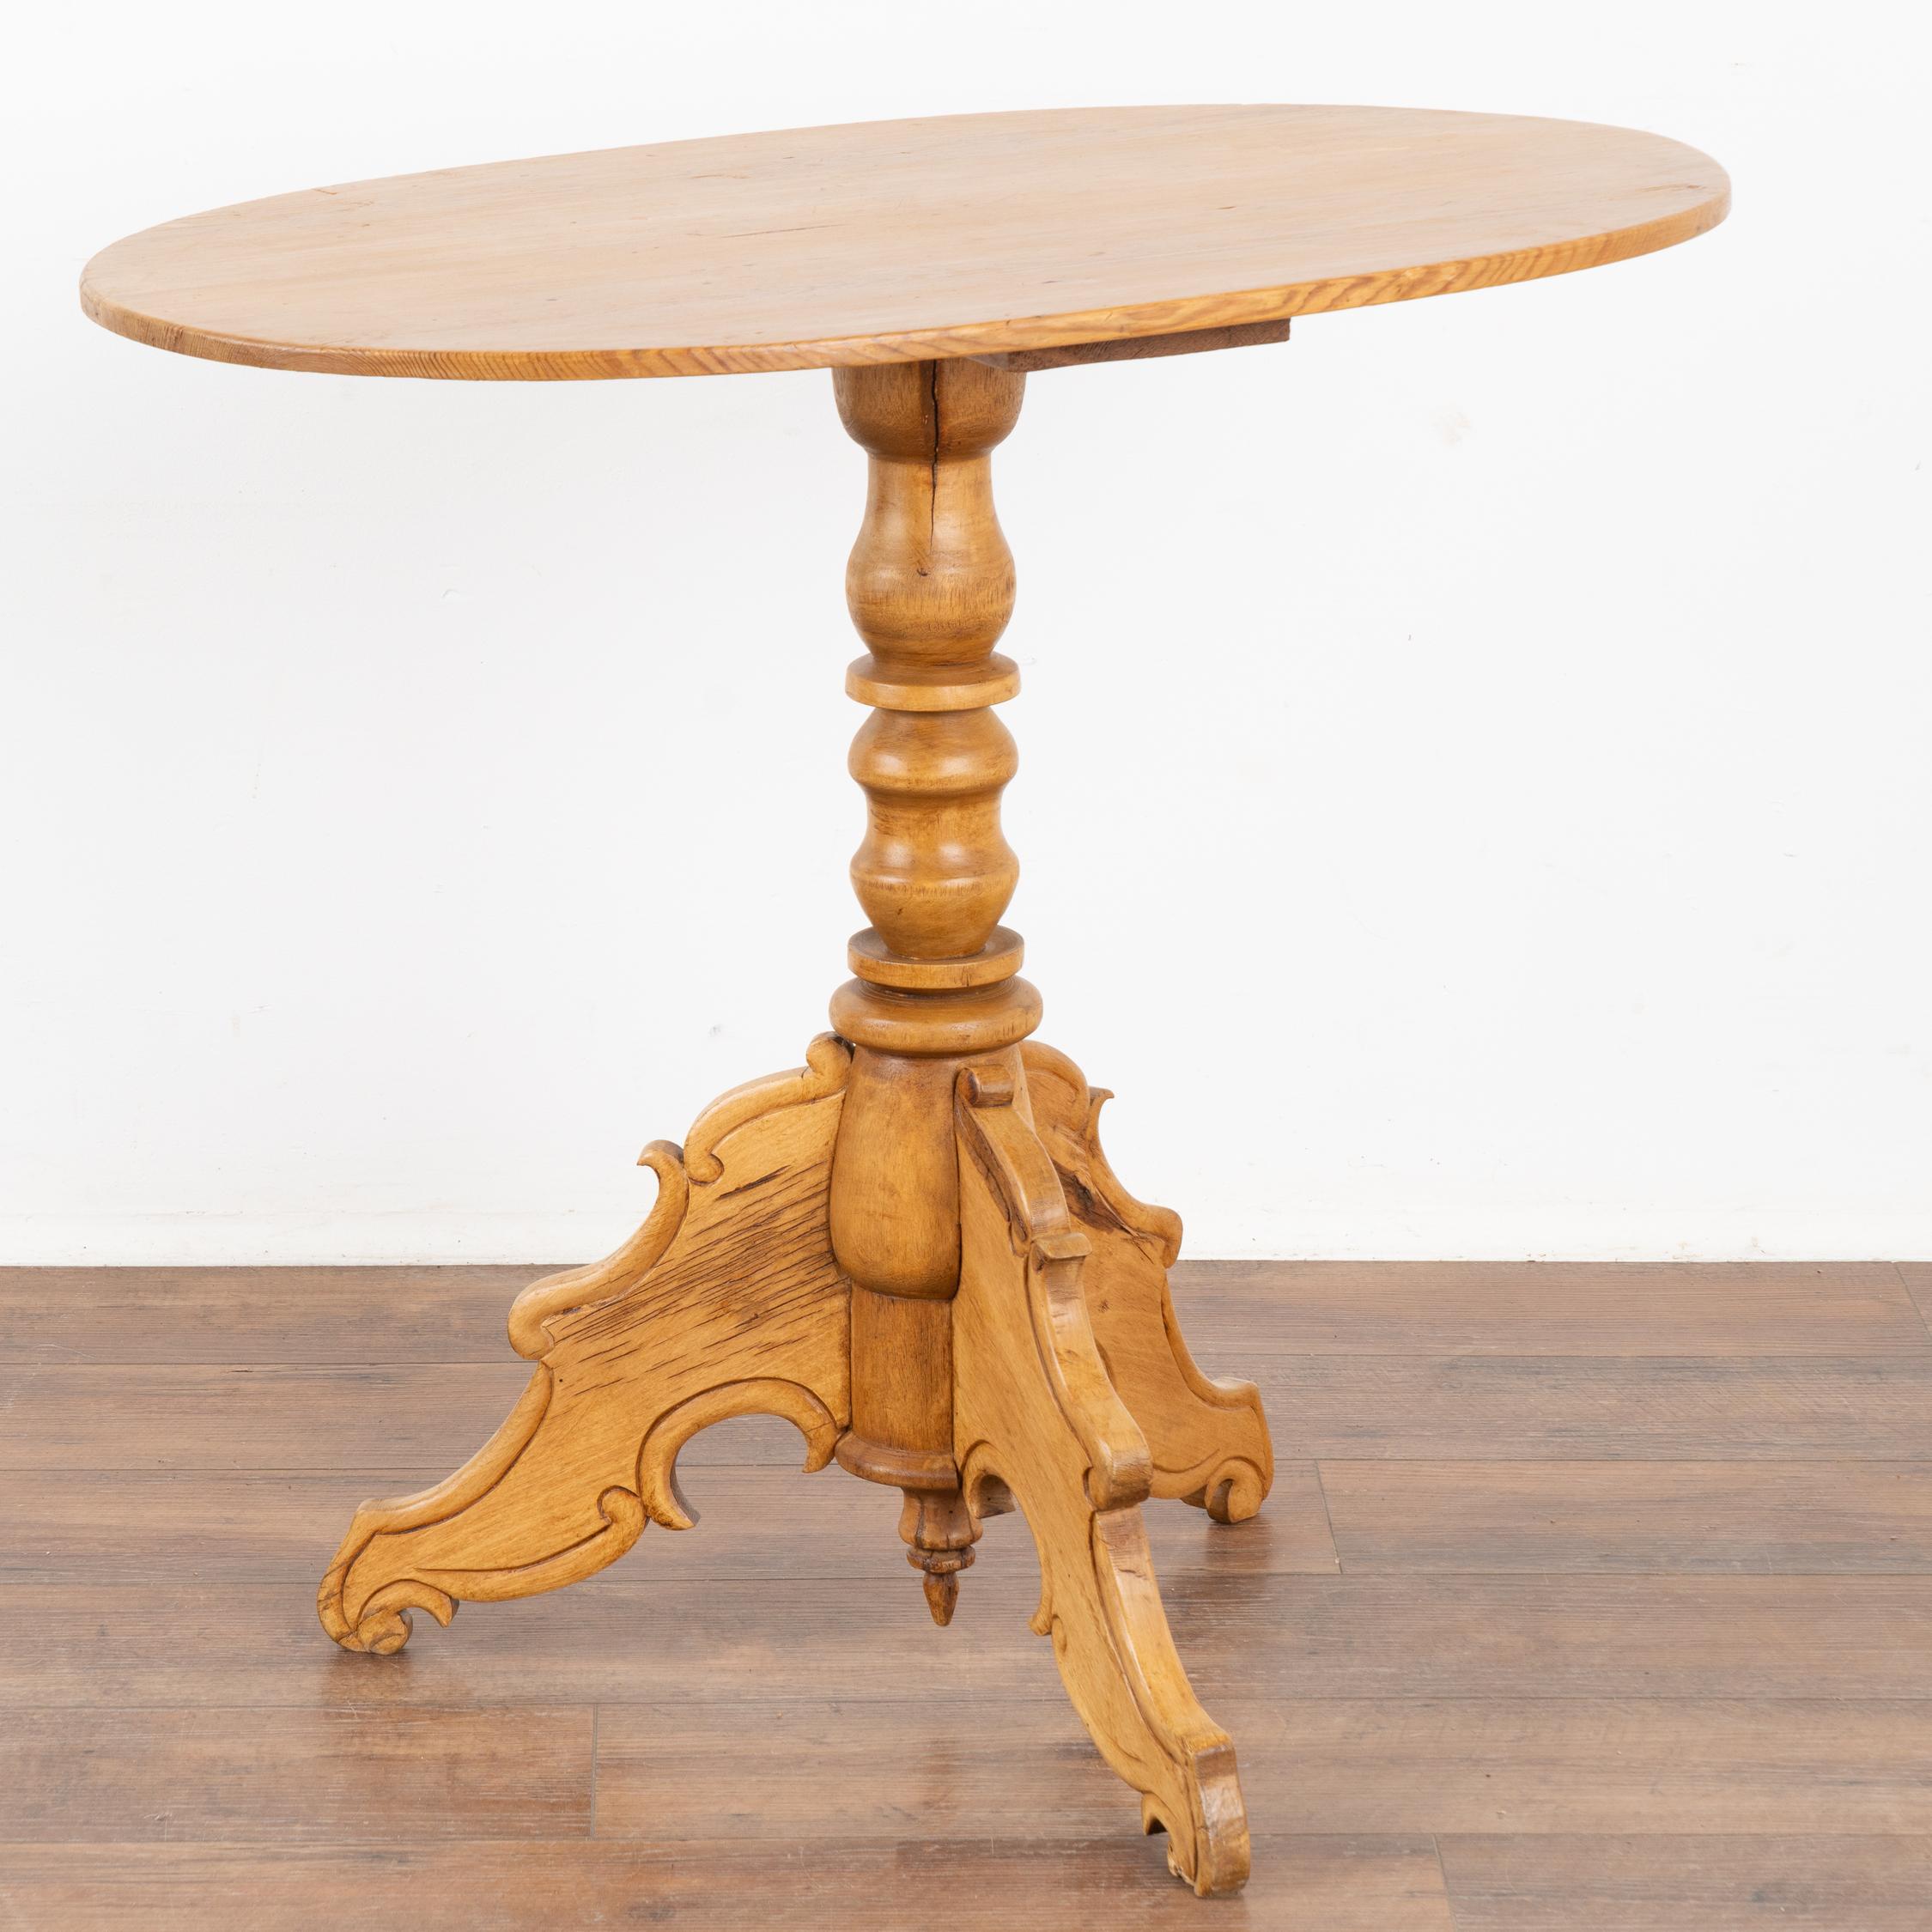 This antique oval pine side table is charming with it's softly rounded edges, turned pedestal base and decoratively carved tripod legs which were a traditional style in Sweden.
There is a gentle appeal to the balance of lines between the oval top,